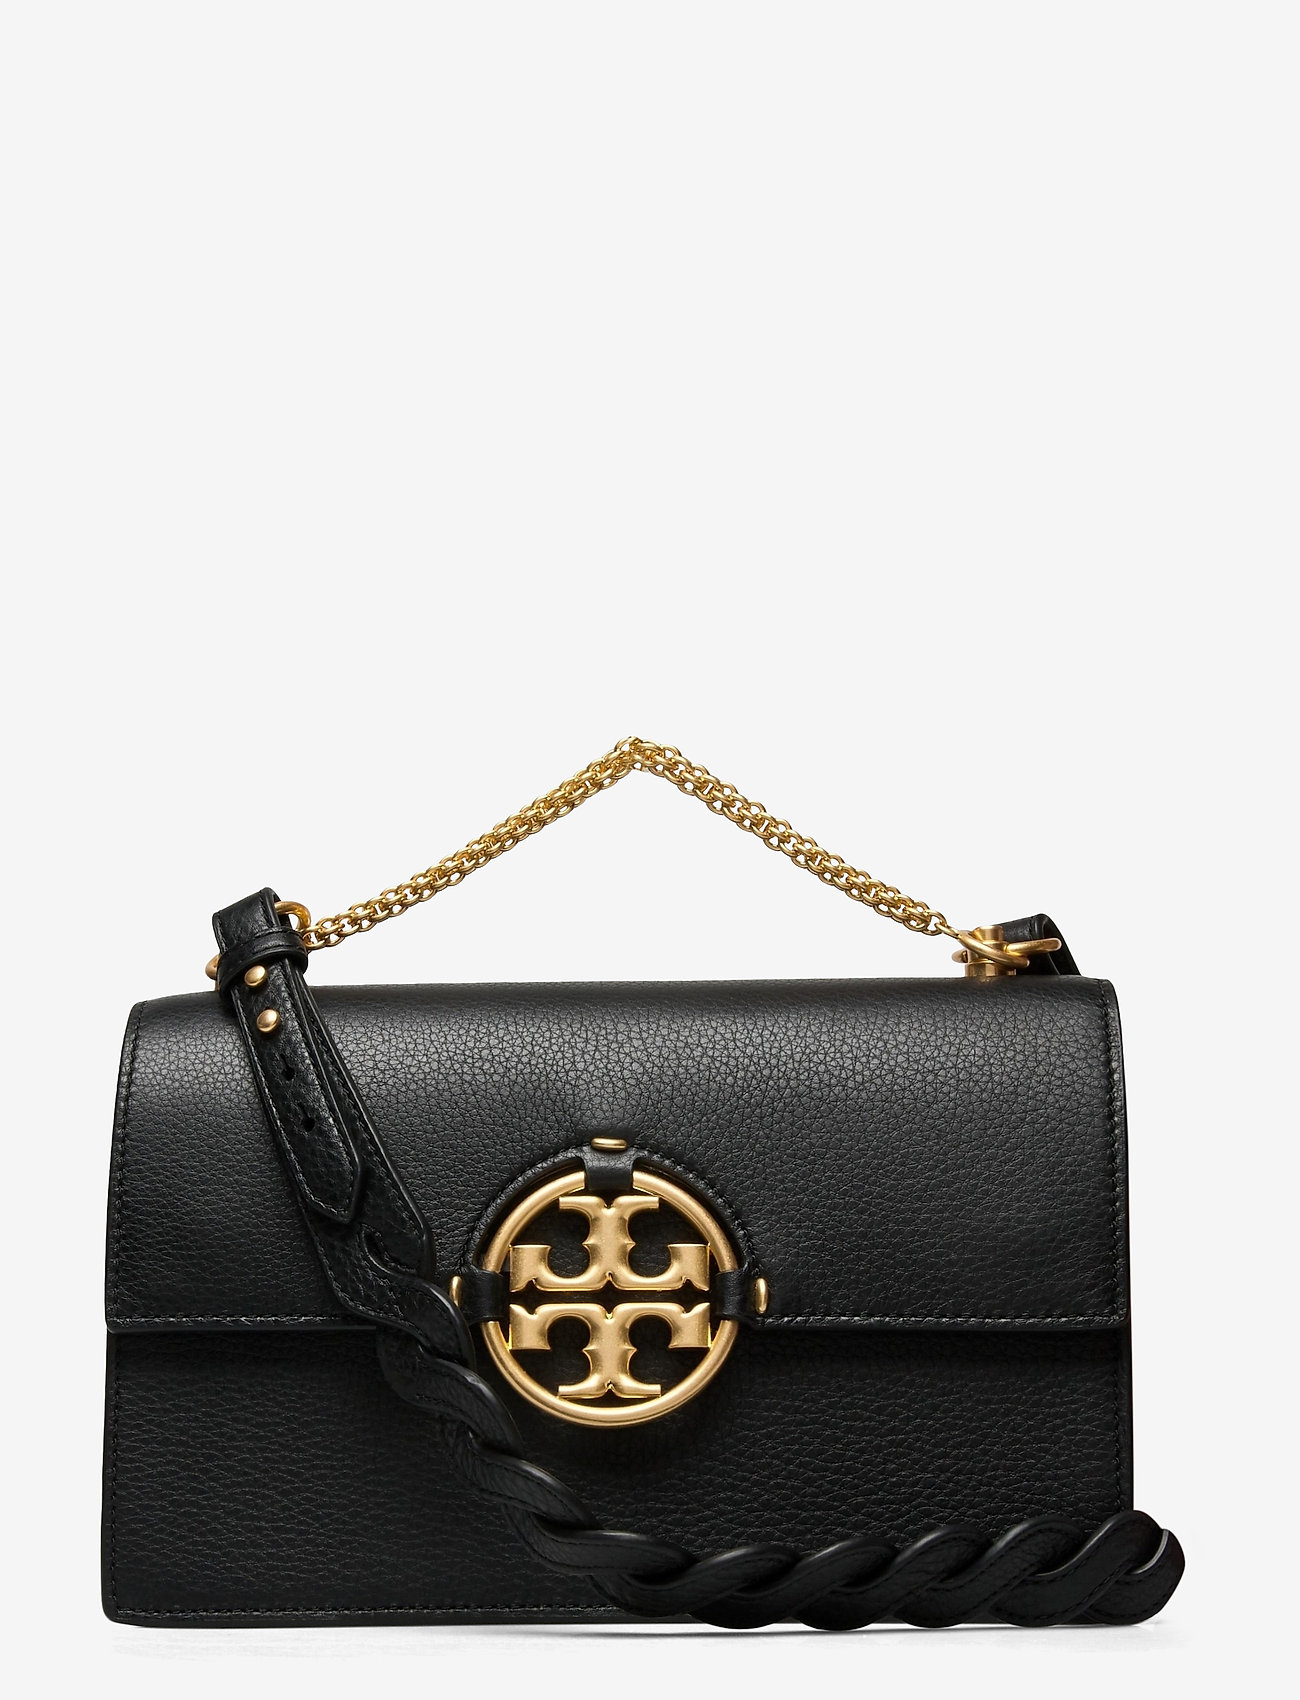 Shoppers Love How Spacious This Tory Burch Crossbody Is | Us Weekly